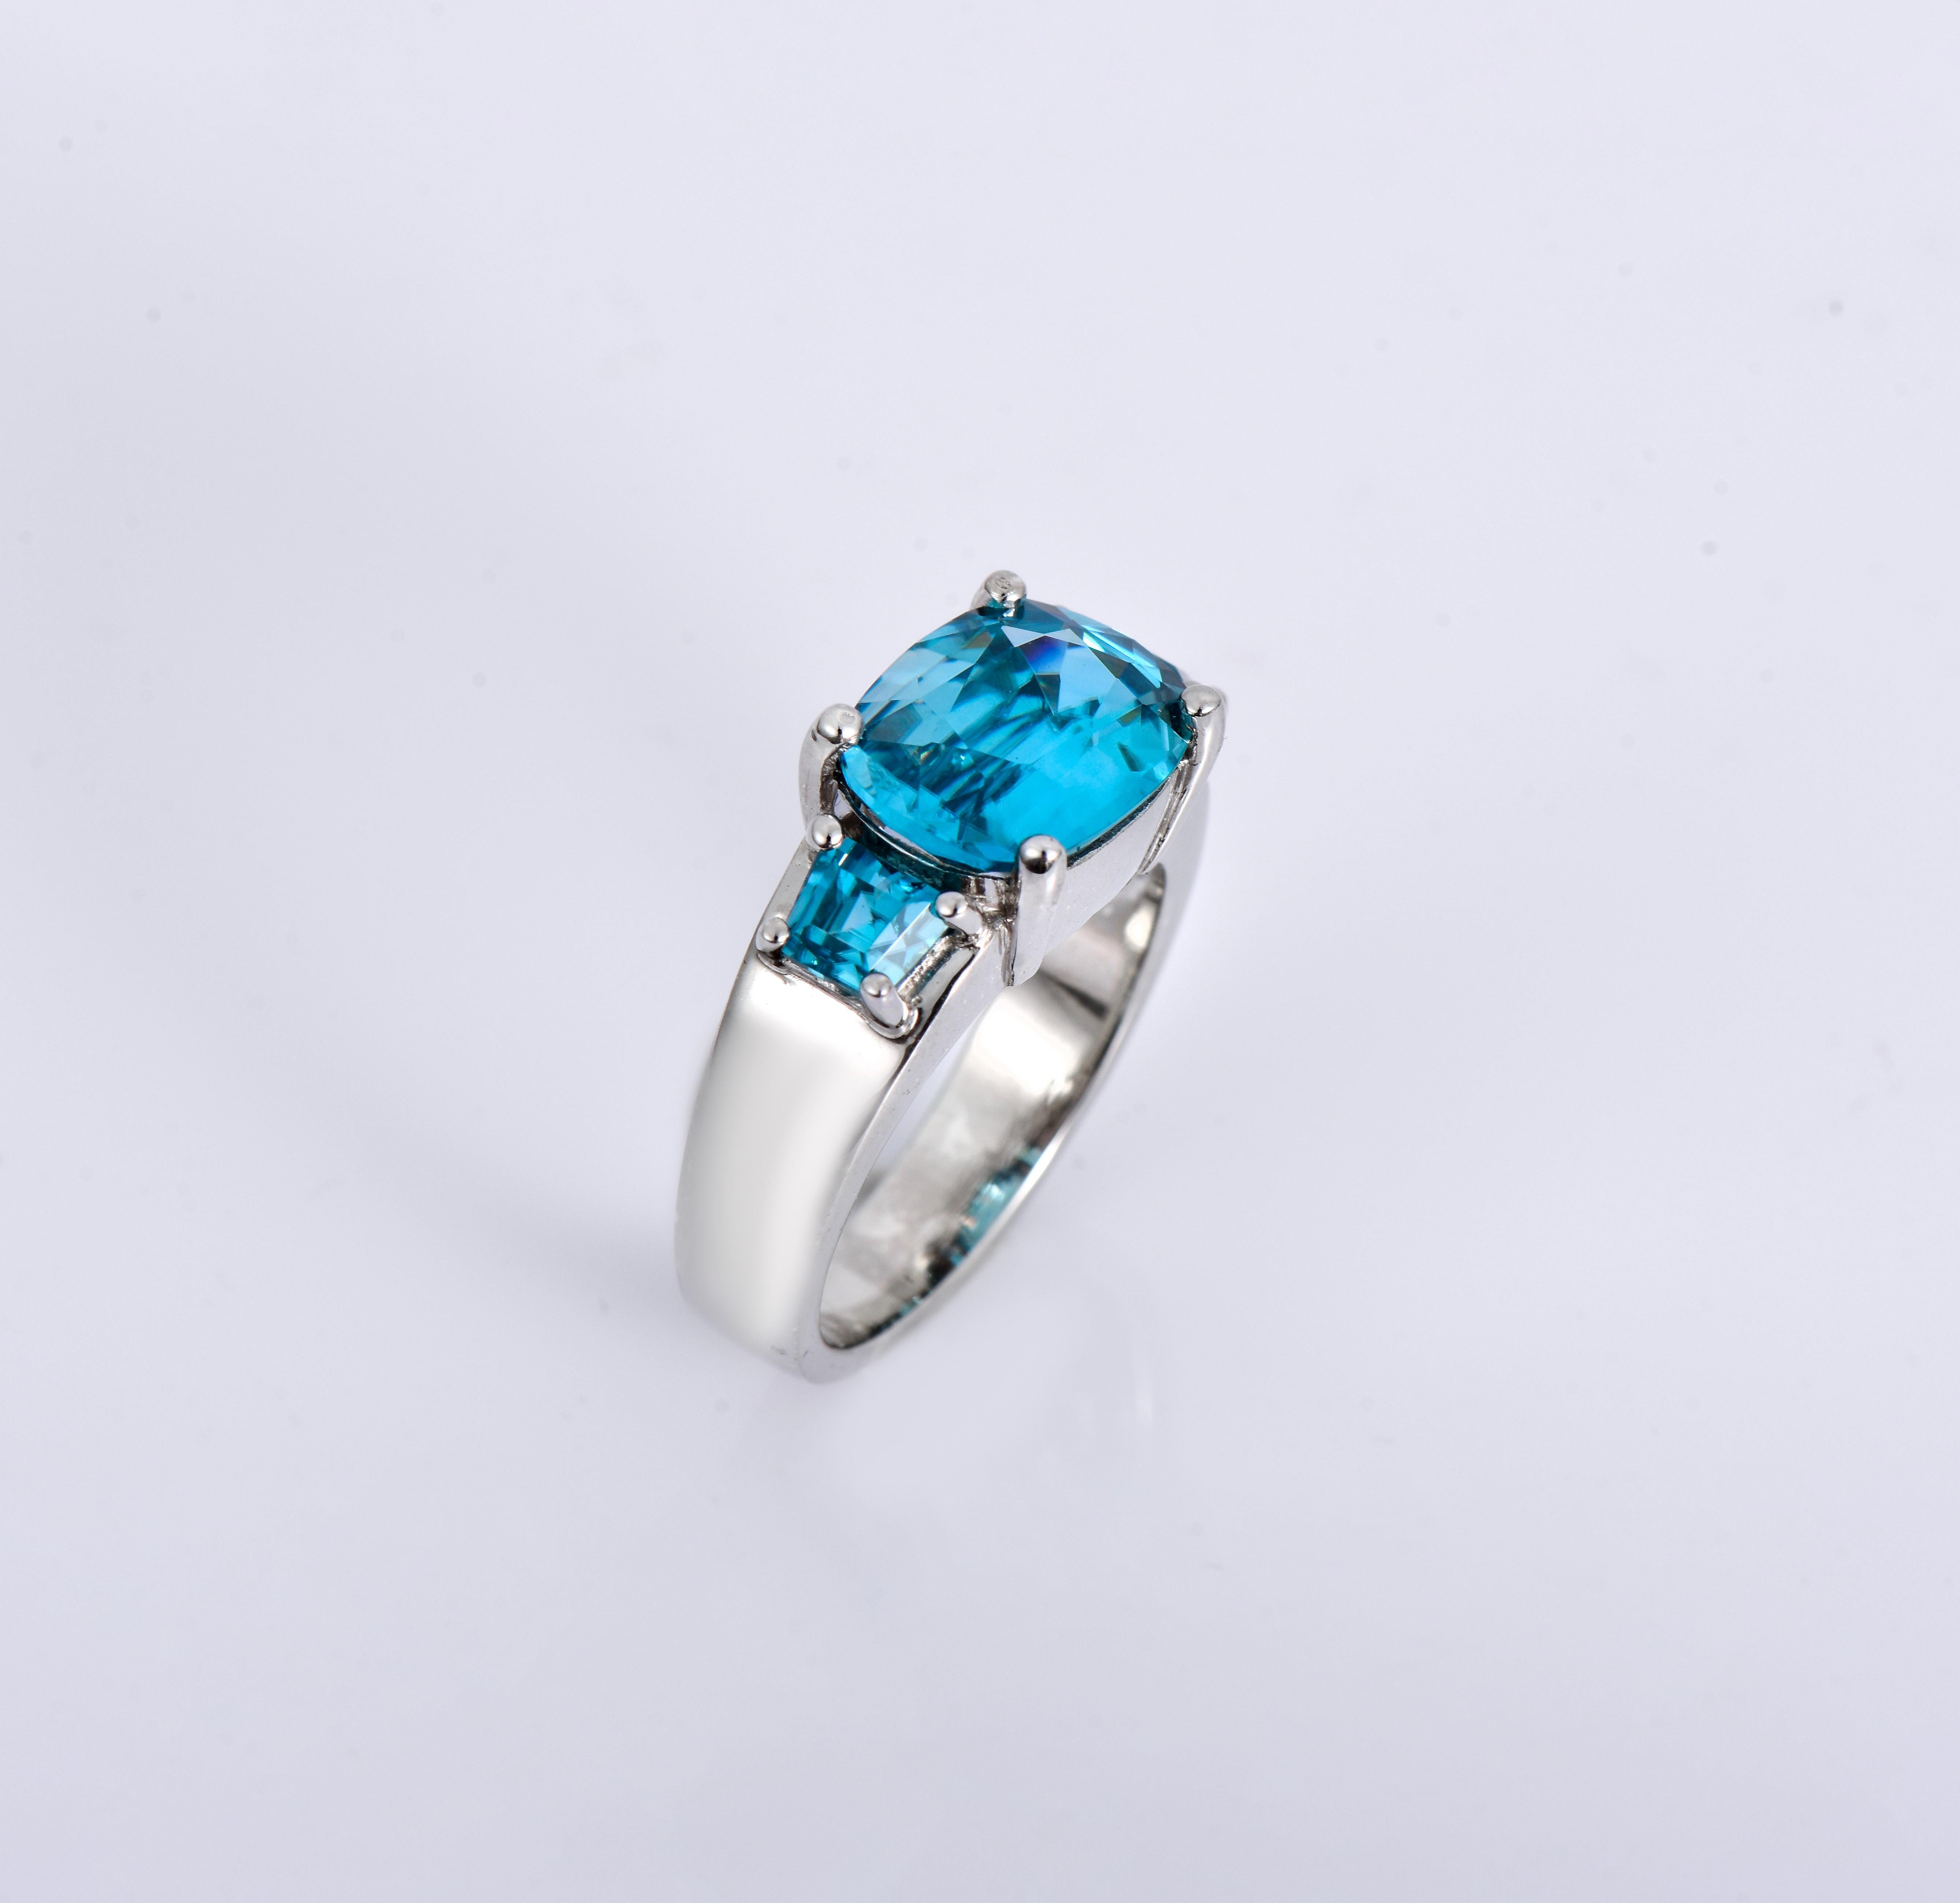 Mixed Cut Orloff of Denmark, 8.27 ct Natural Blue Zircon Ring in 925 Sterling Silver For Sale